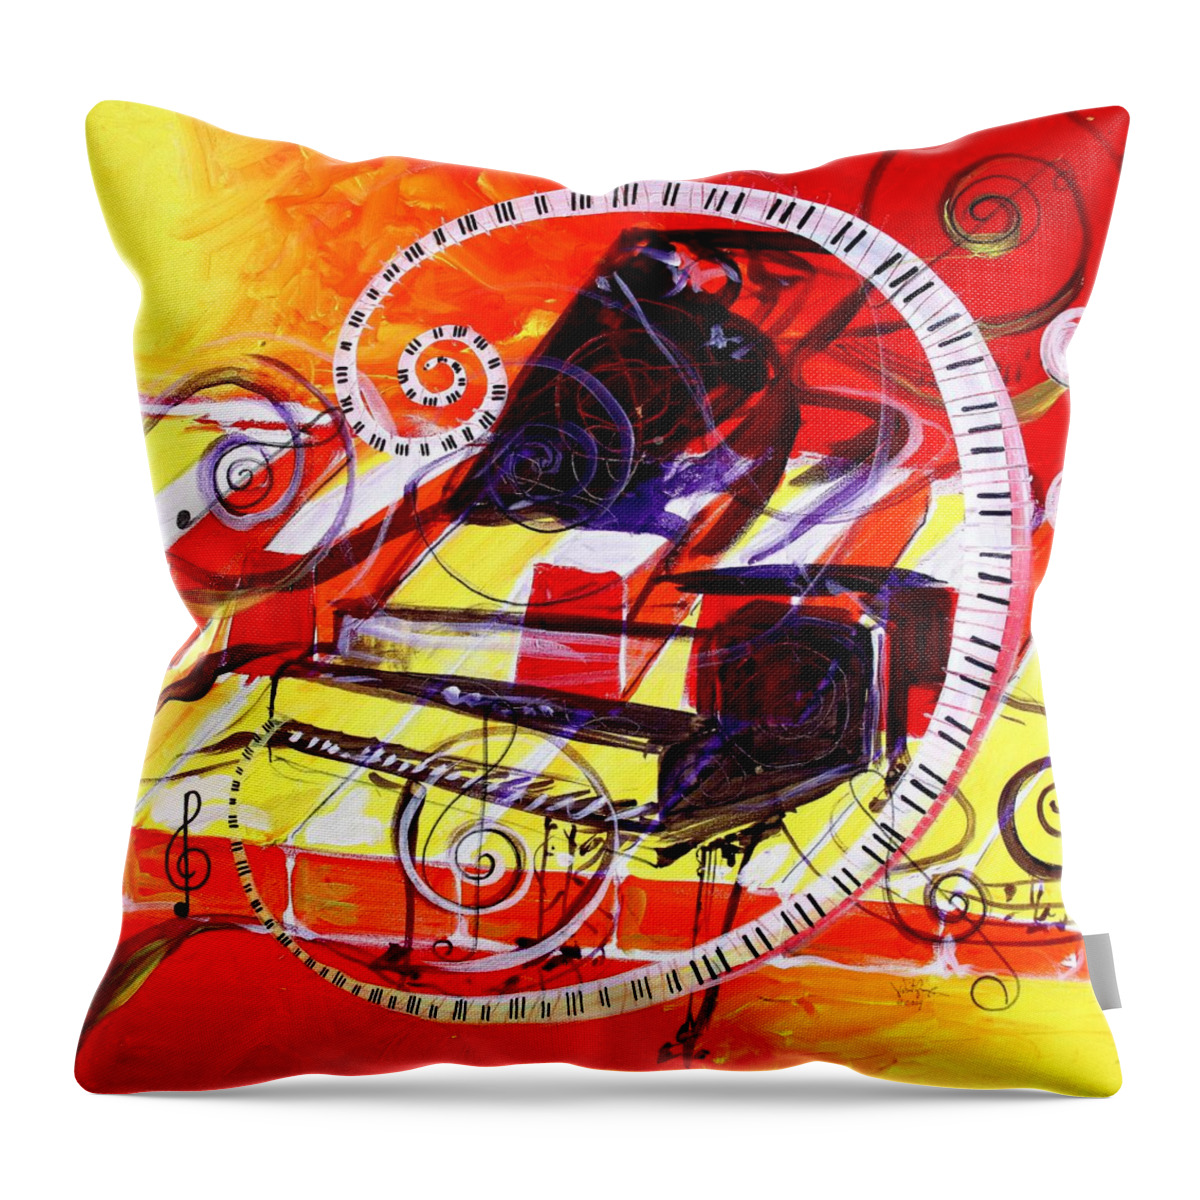 Piano Throw Pillow featuring the painting Abstract Jazzy Piano by J Vincent Scarpace